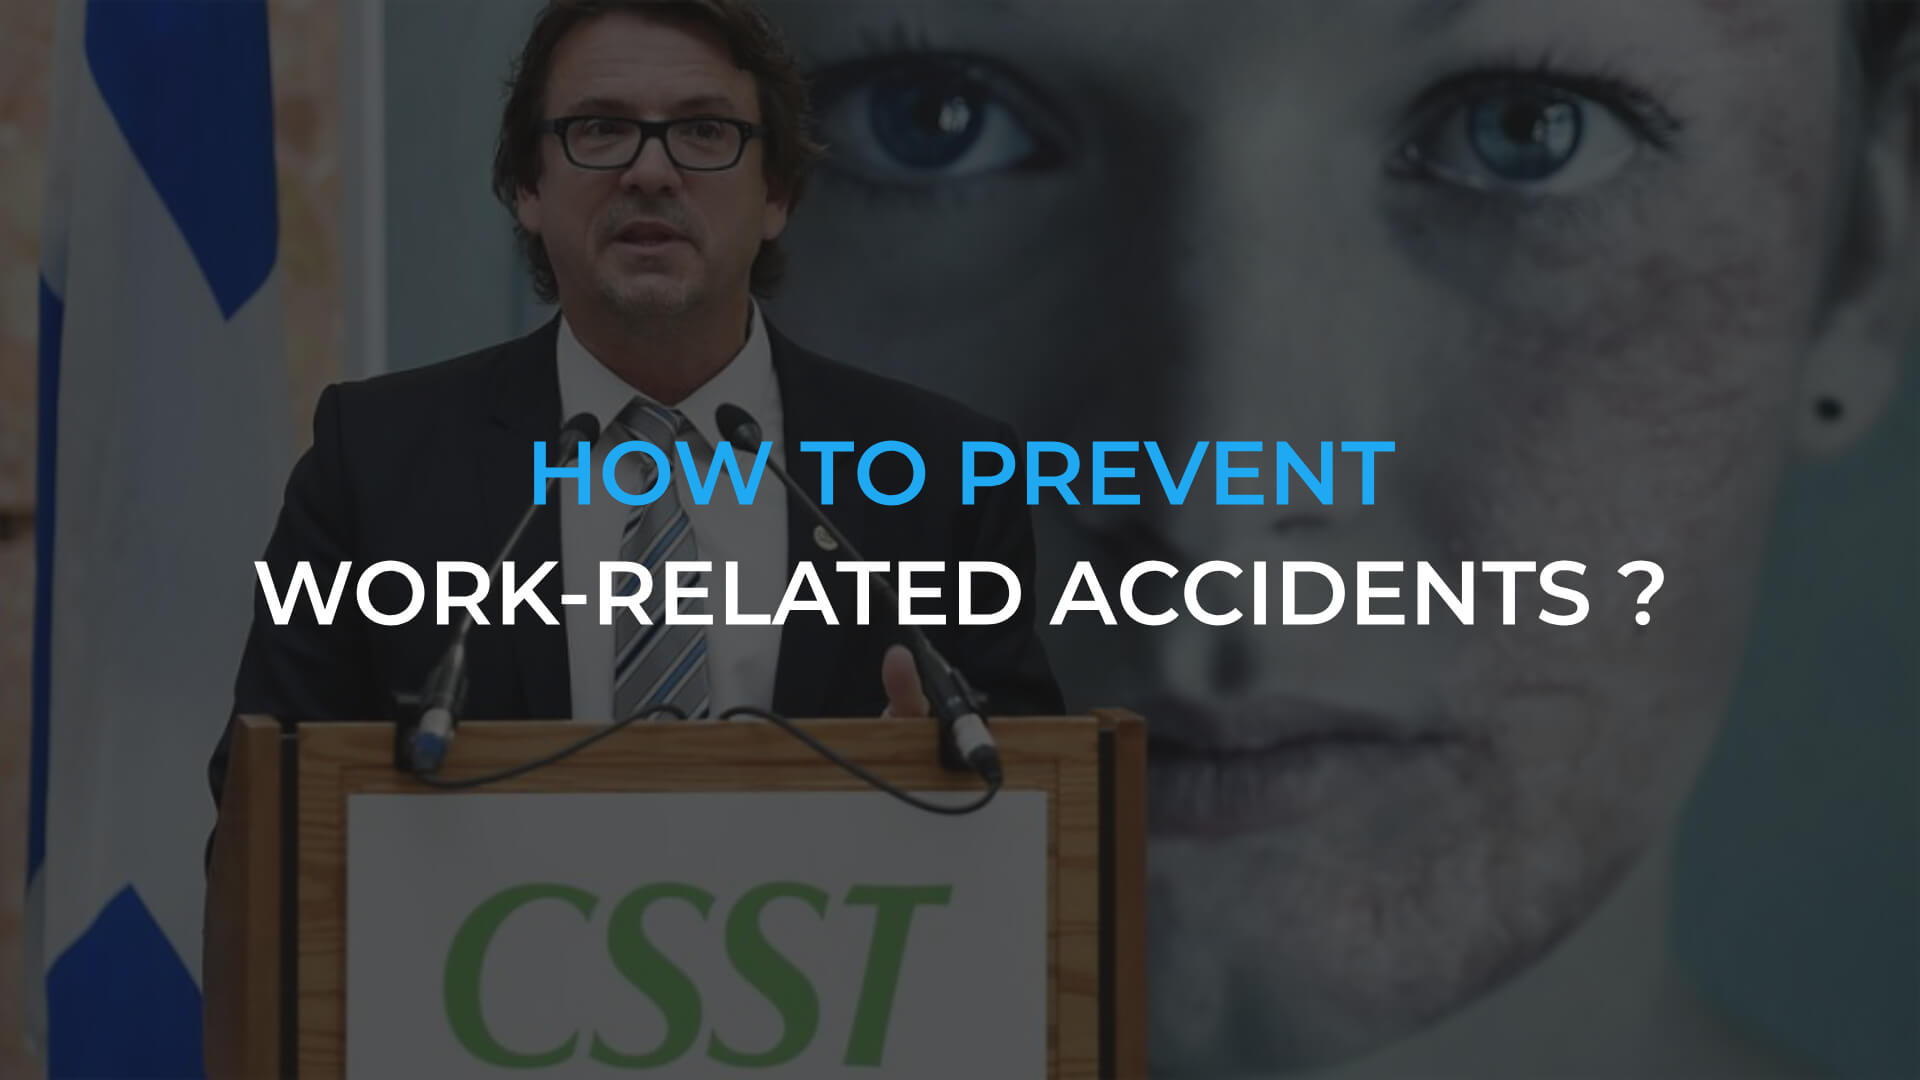 How to prevent work-related accidents